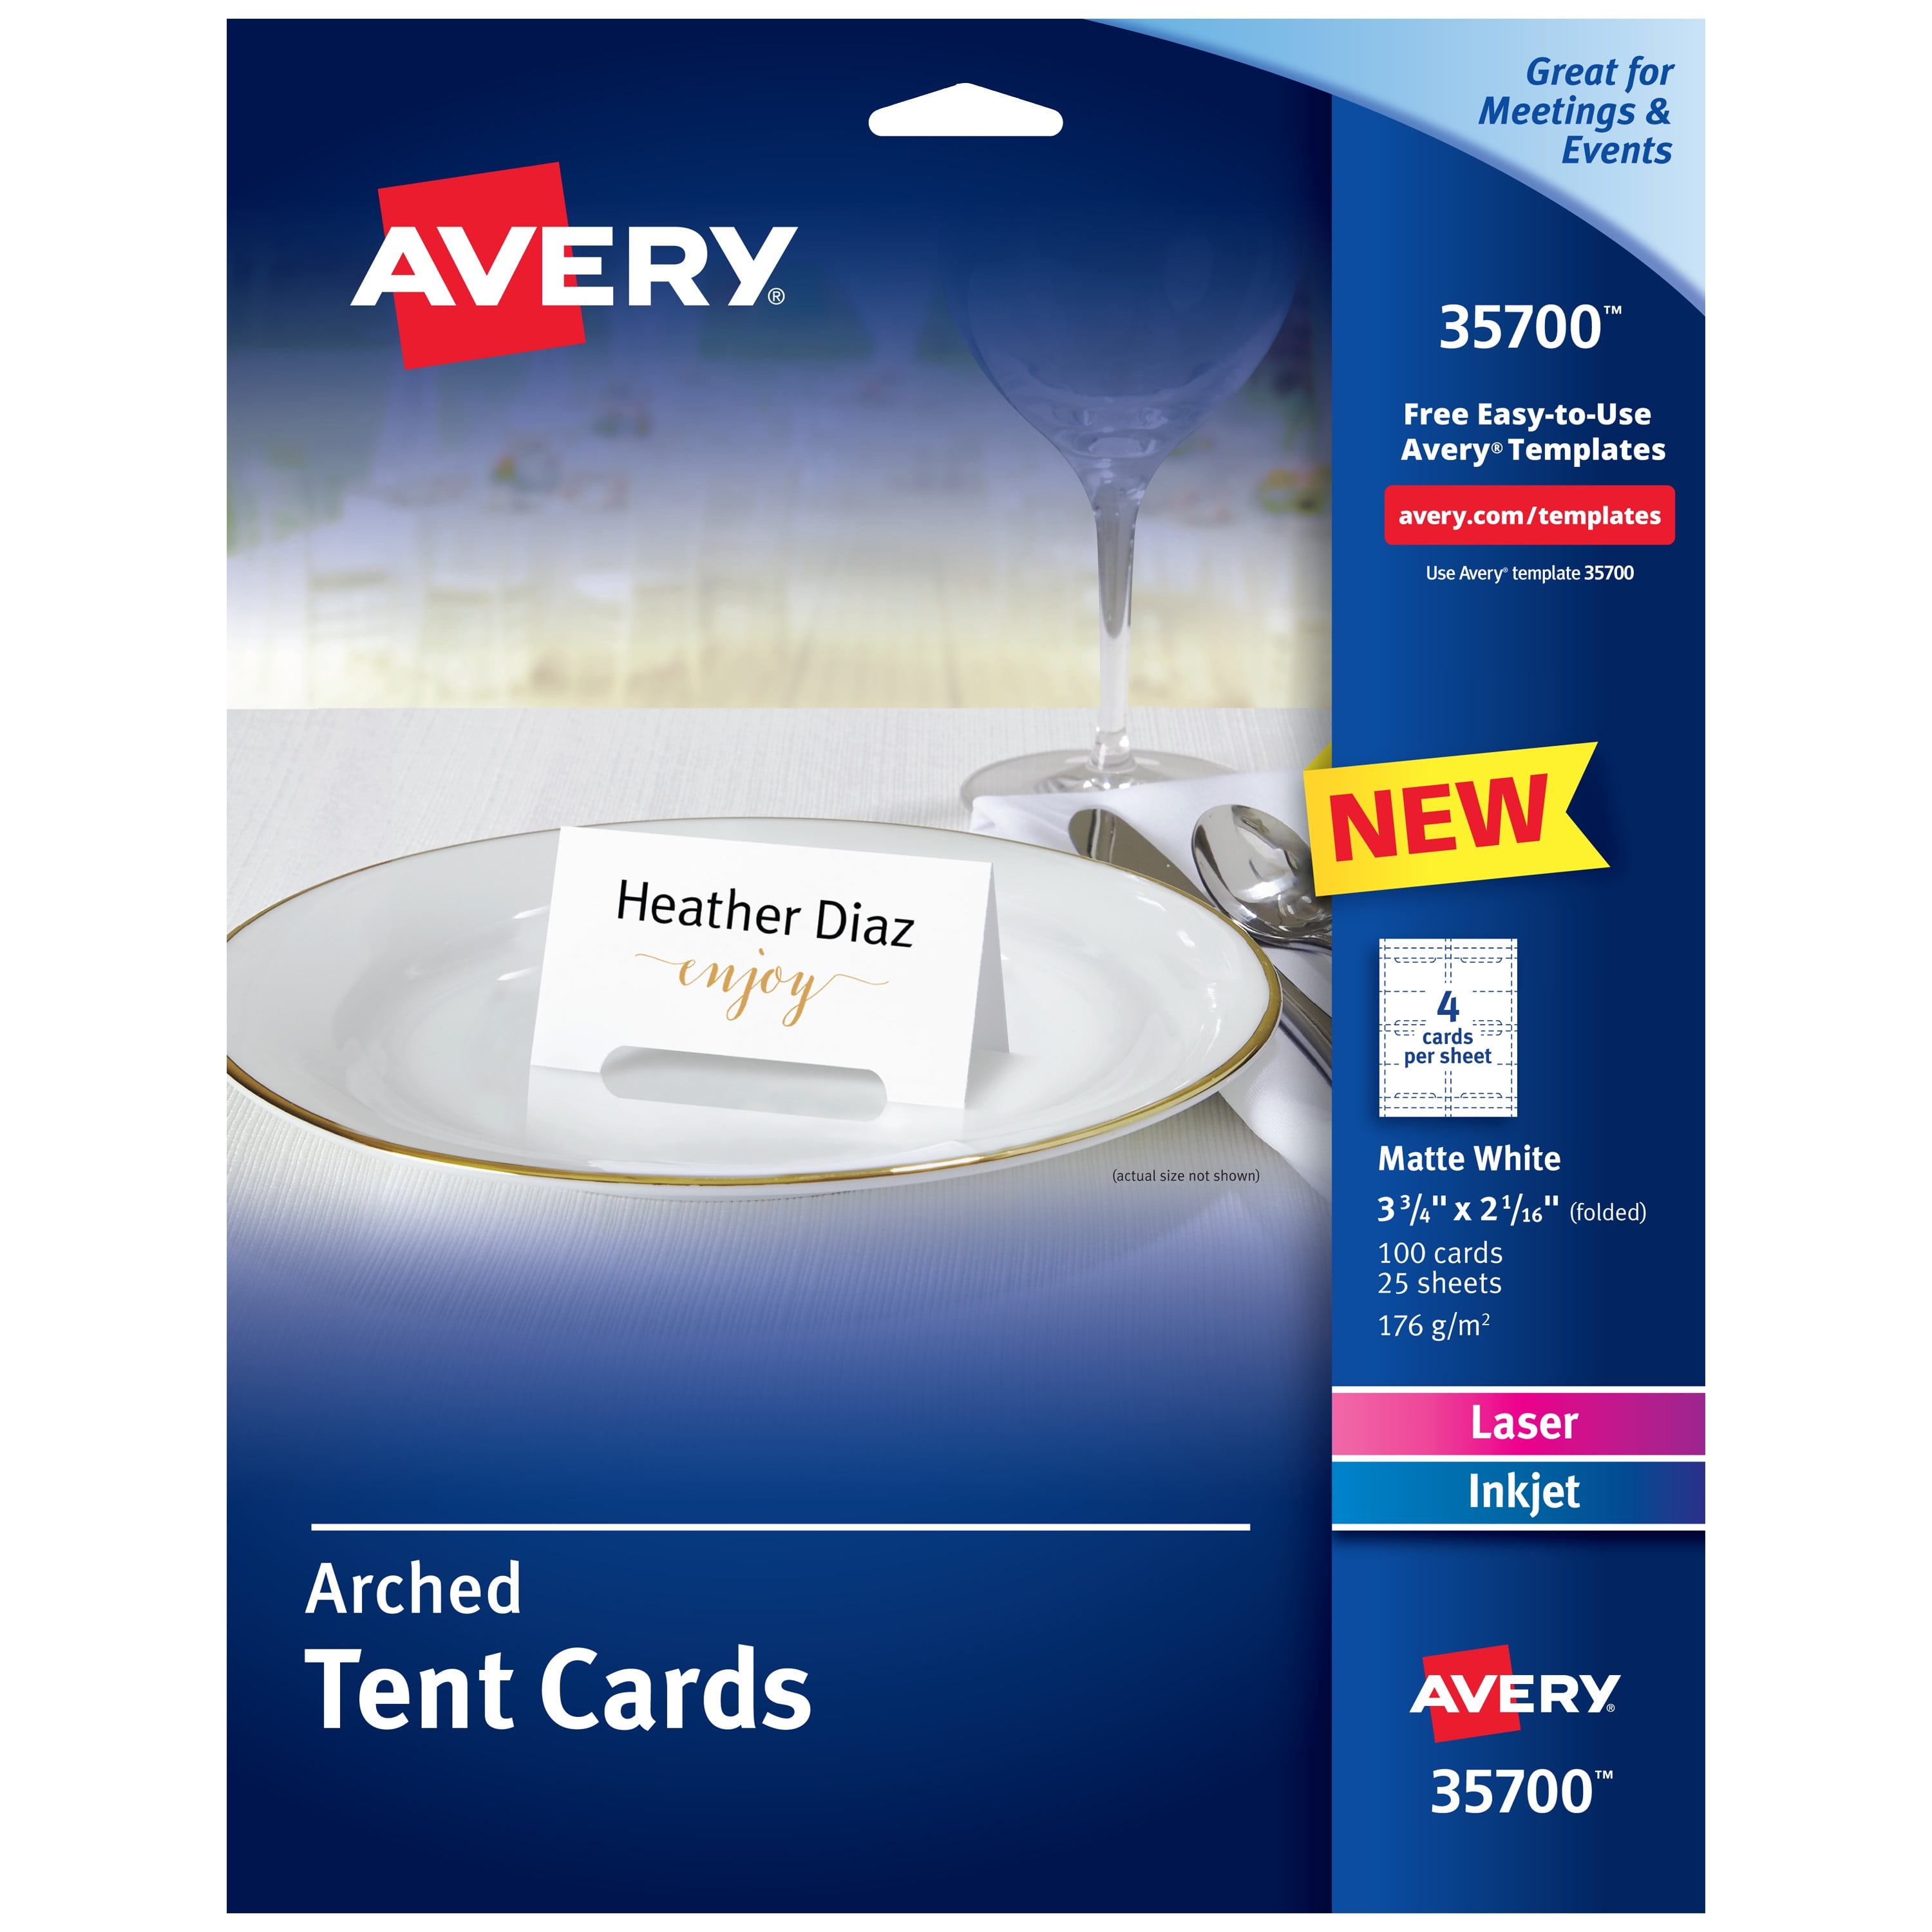 Avery Arched Die Cut Tent Cards 2 1 16 X 3 3 4 65 Lbs 176 Gsm Laser Inkjet 100 Cards